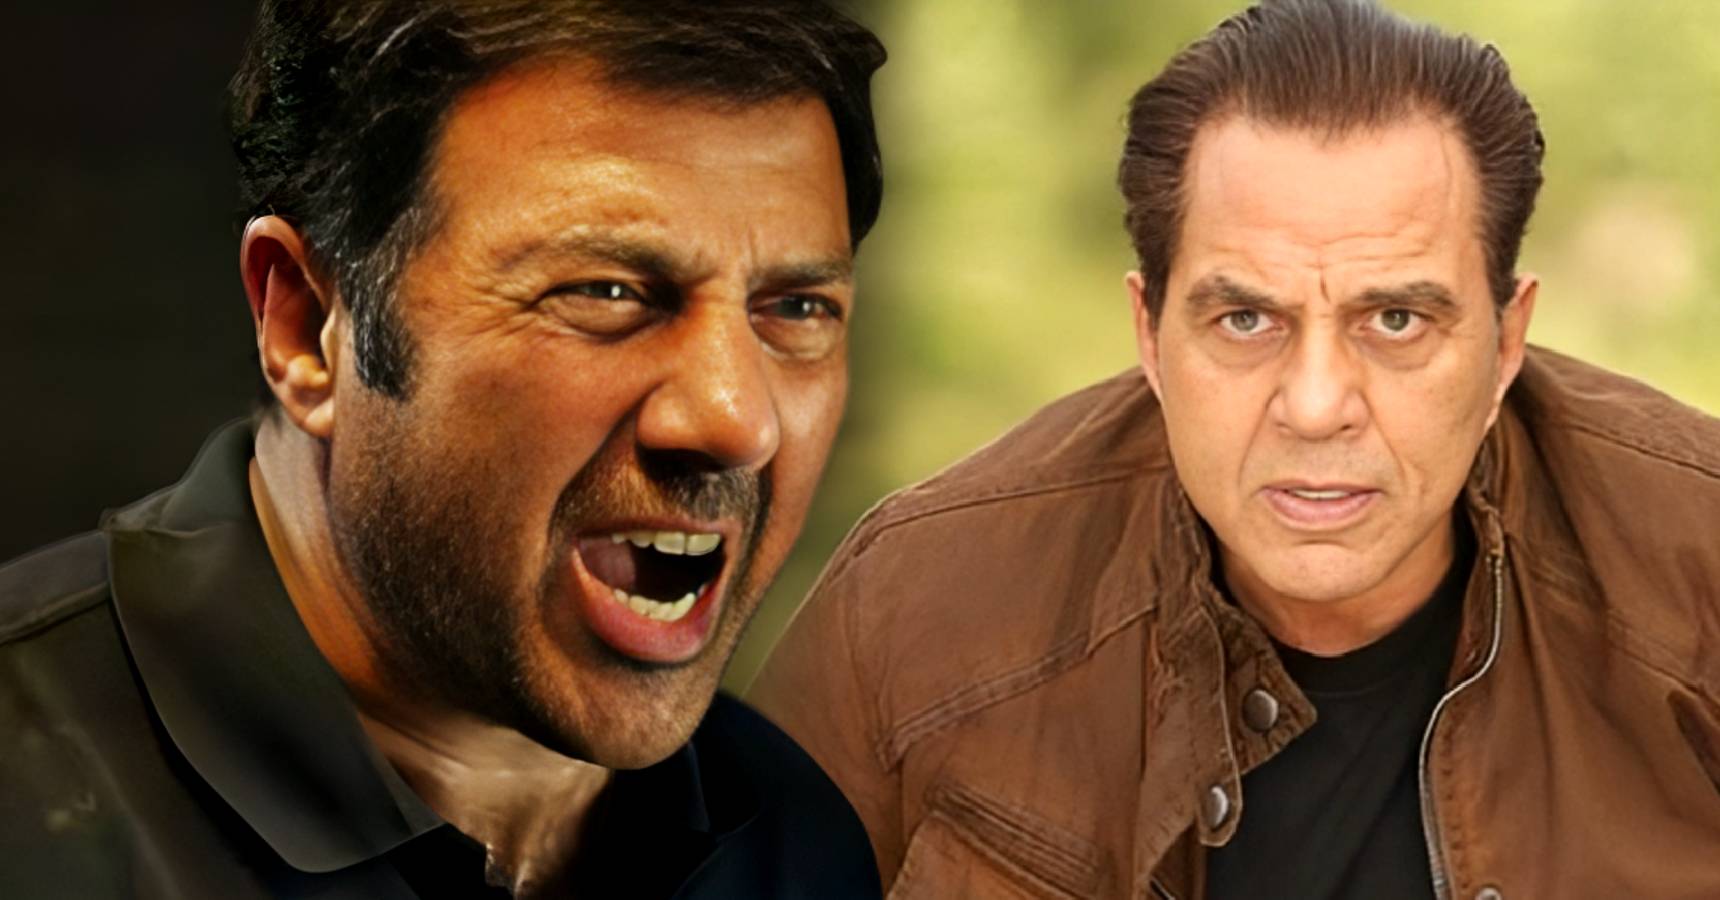 When Bollywood actor Sunny Deol got slapped by father Dharmendra